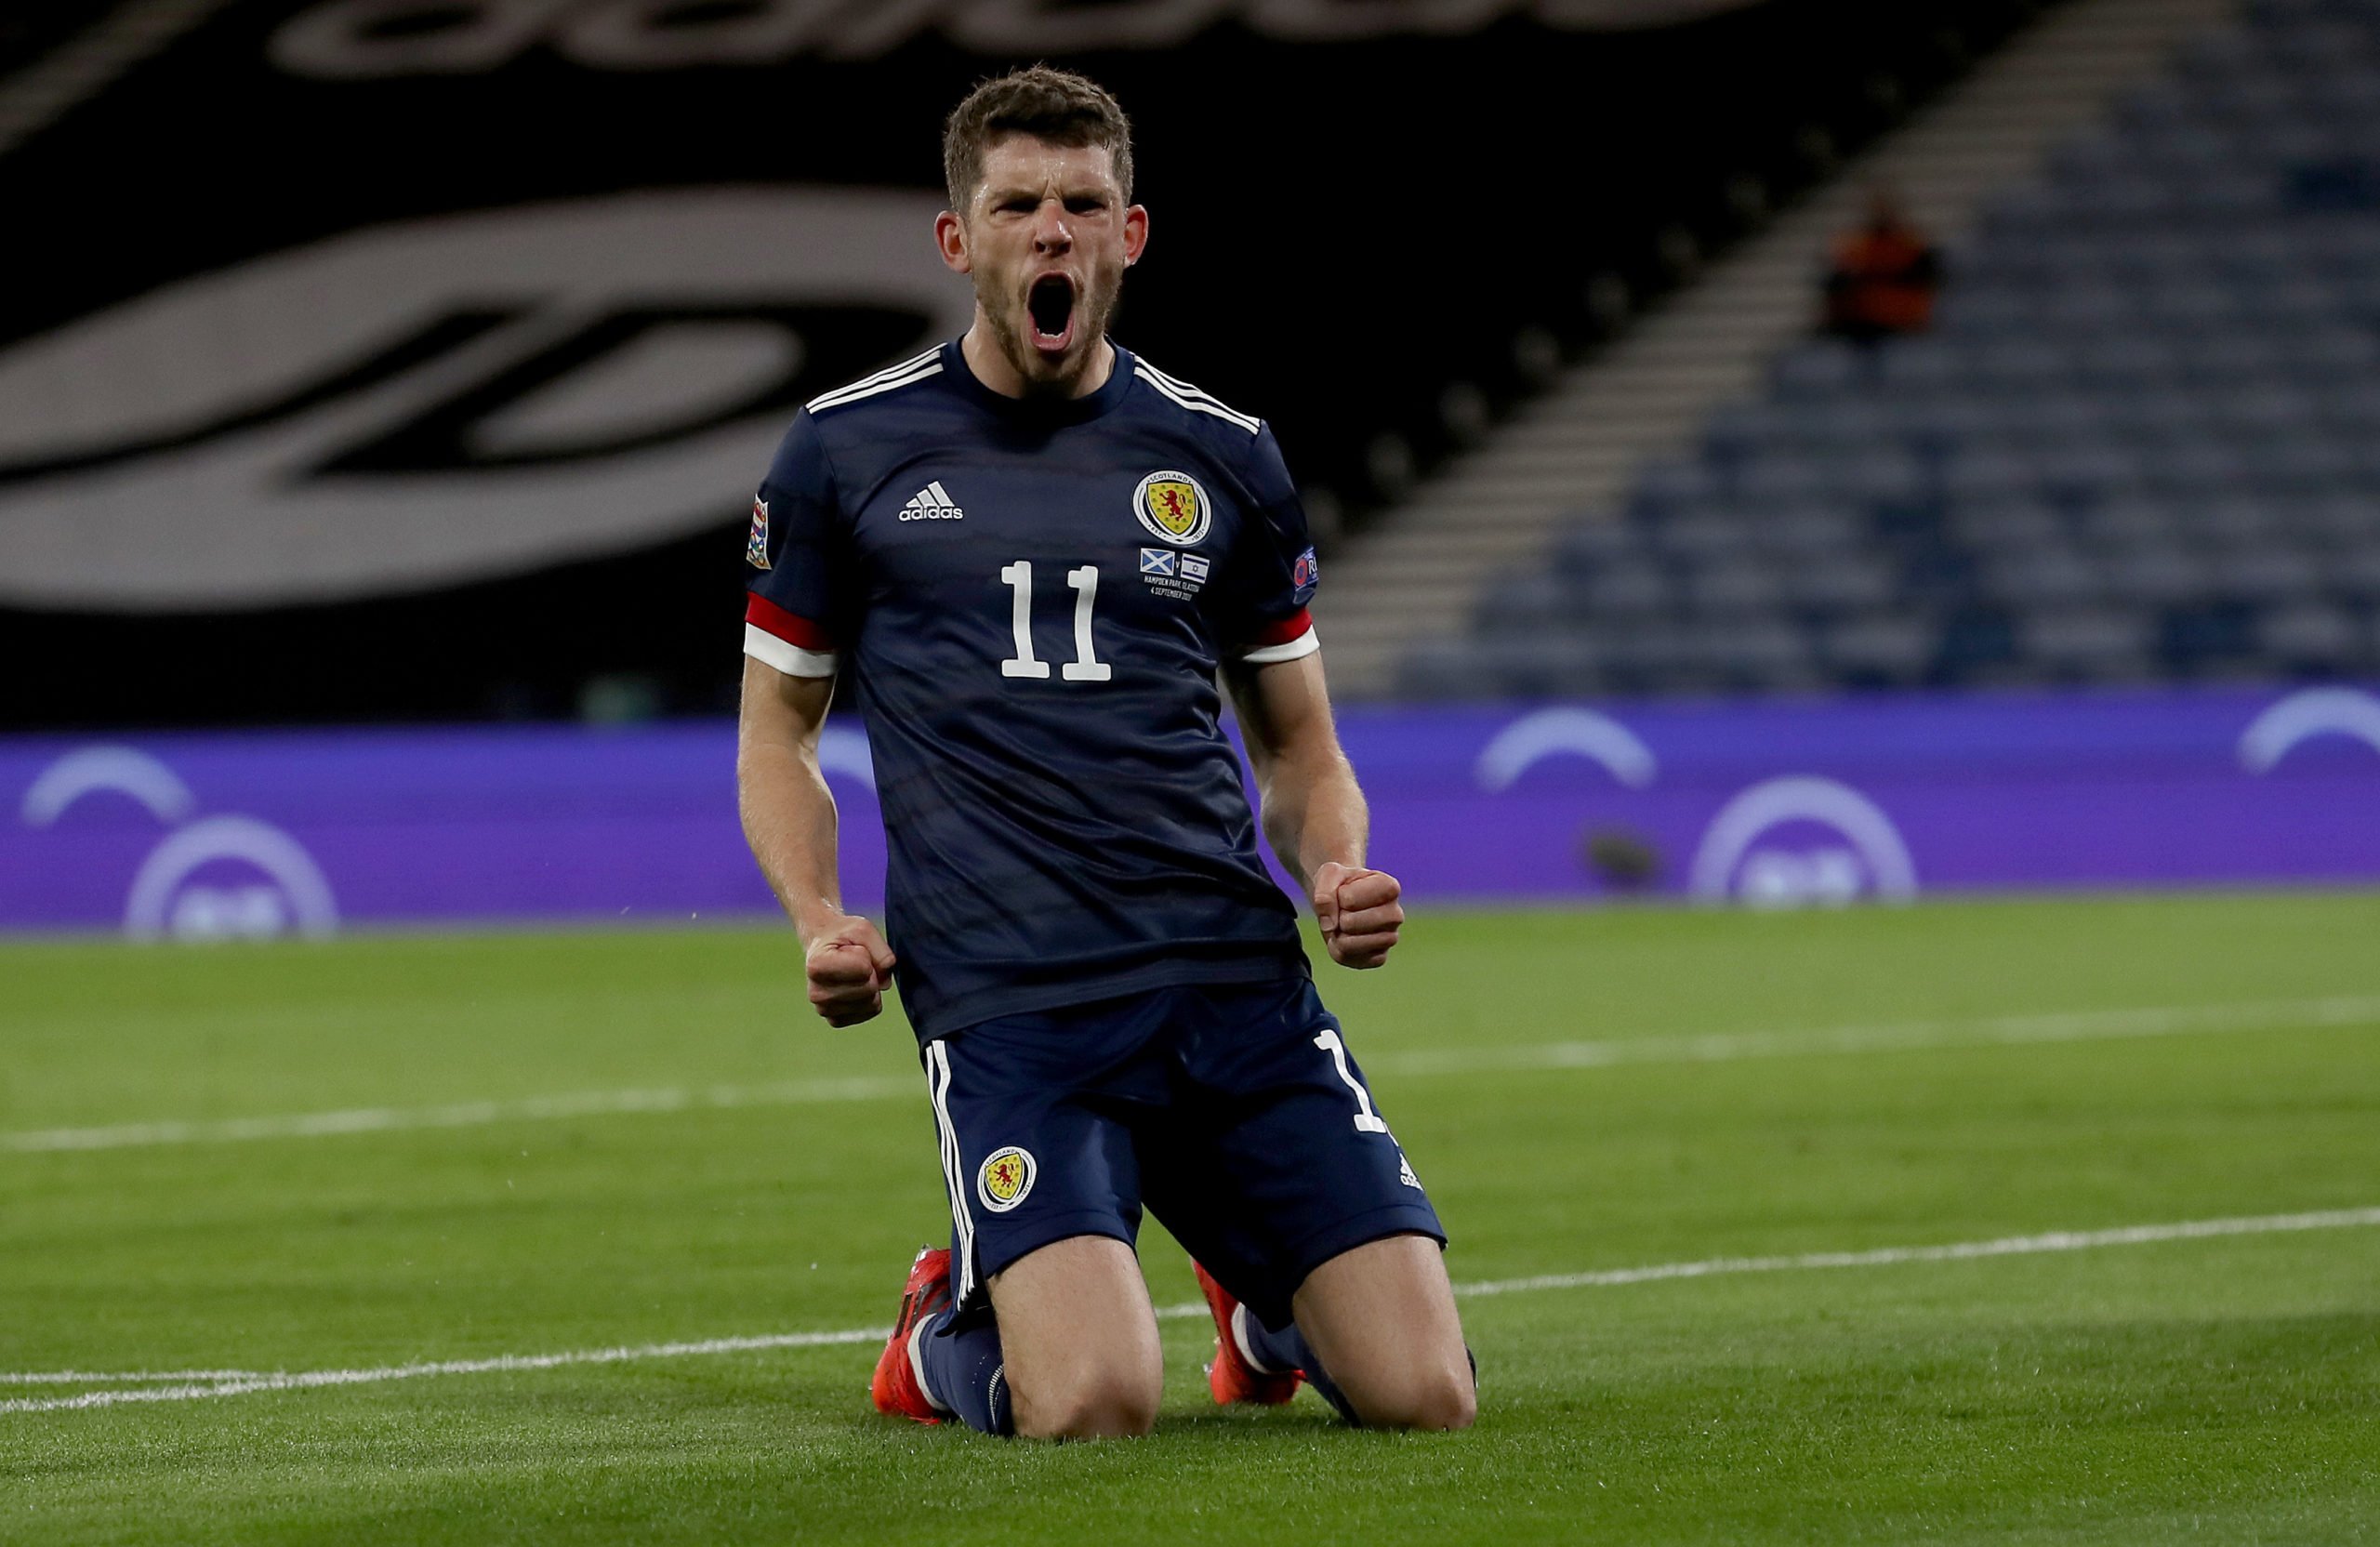 Ryan Christie move from Celtic to Bournemouth leaves an underwhelming taste